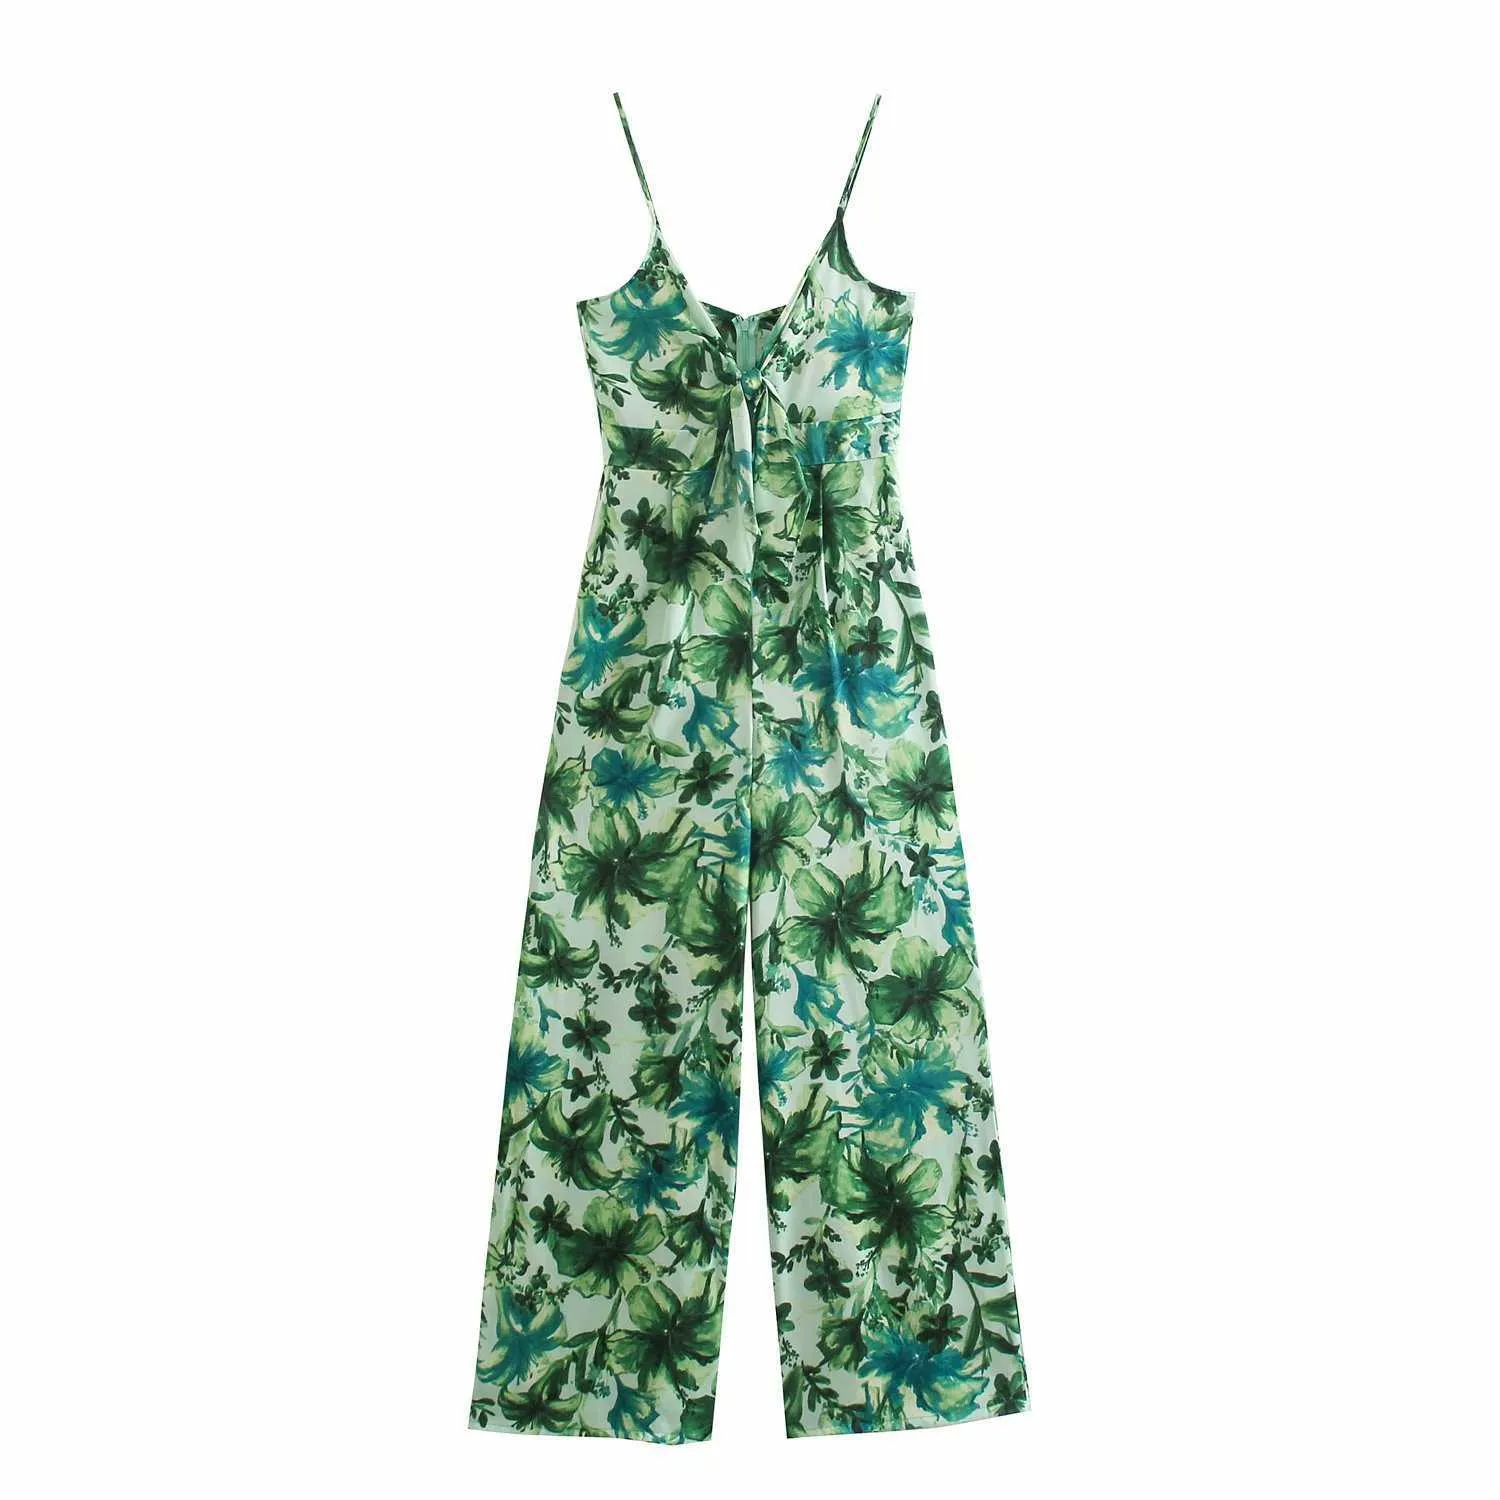 jumpsuit women Summer Casual Fashion Chic Elegant Lady Romper outfit playsuit Women Hawaiian tropical style 210709